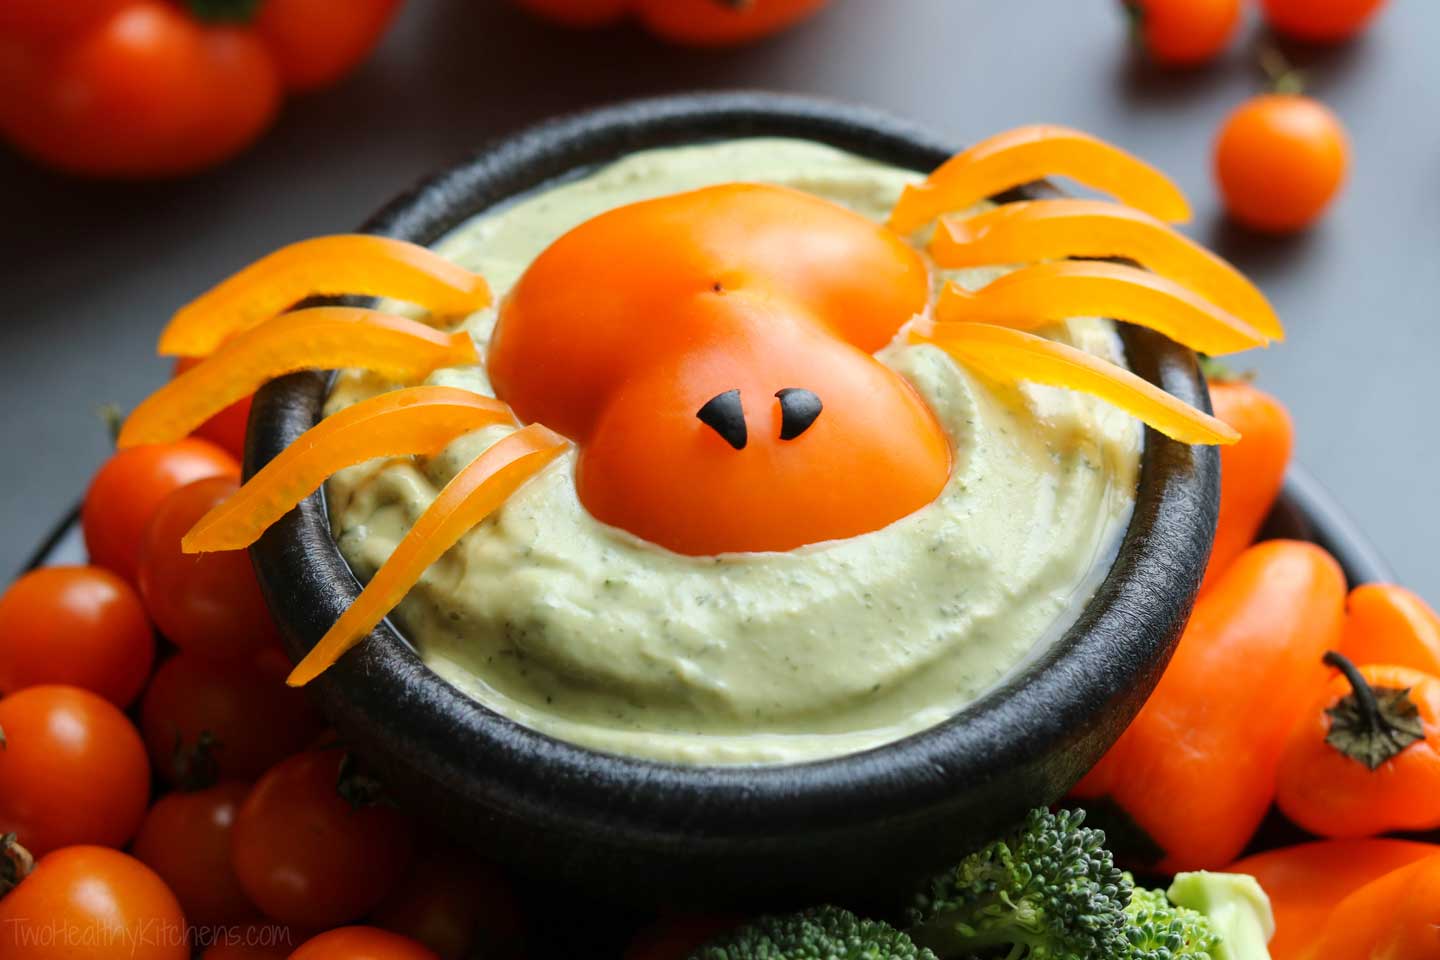 Cut from just one bell pepper, this Spooky Spider only takes about 5 minutes to make, and can even be made ahead of time!